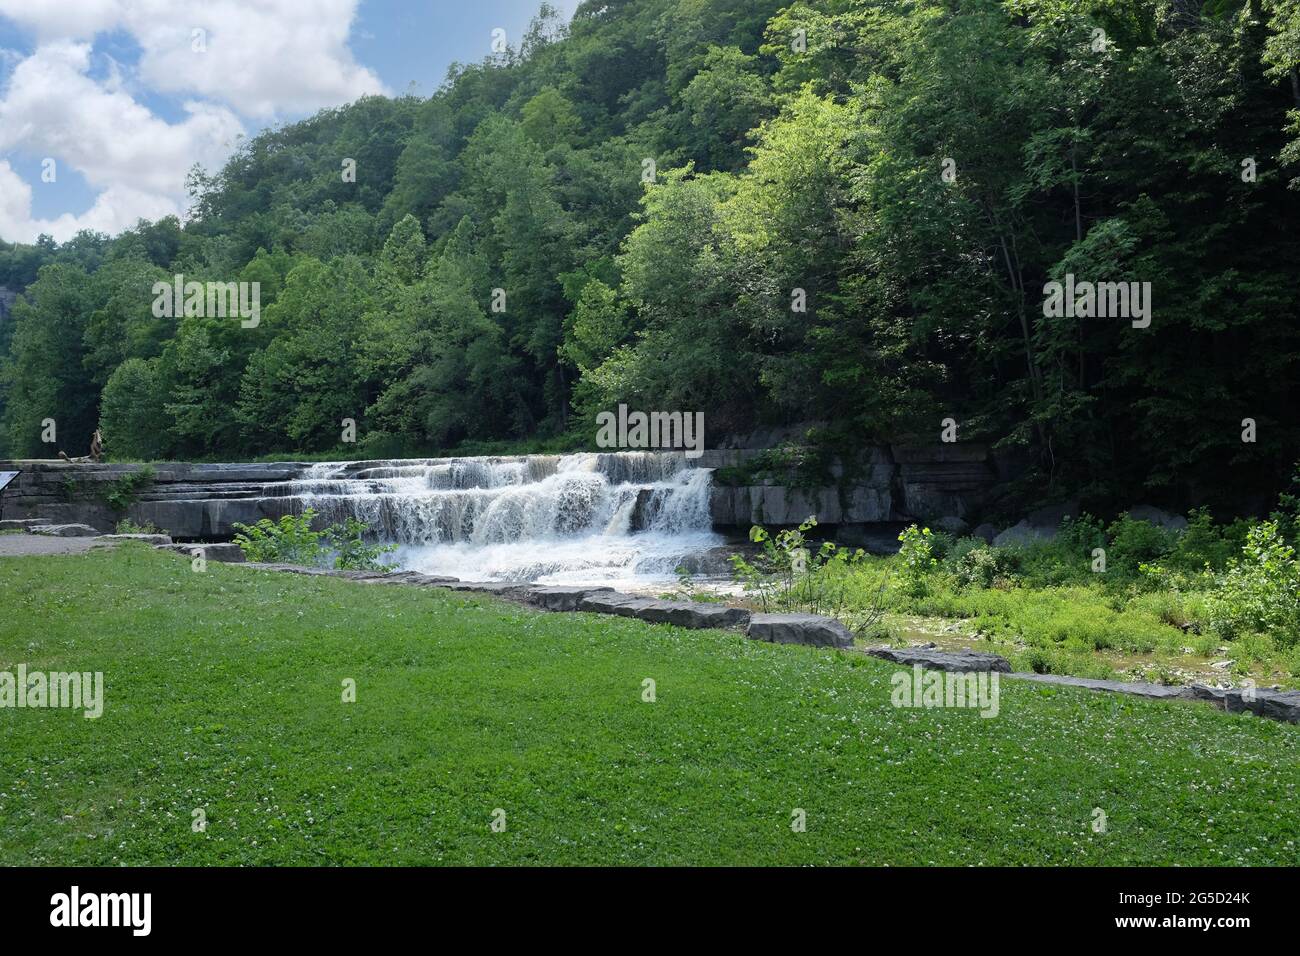 The Lower Falls in Taughannock Falls State Park Near Lake Cayuga in the Finger Lakes District. Stock Photo